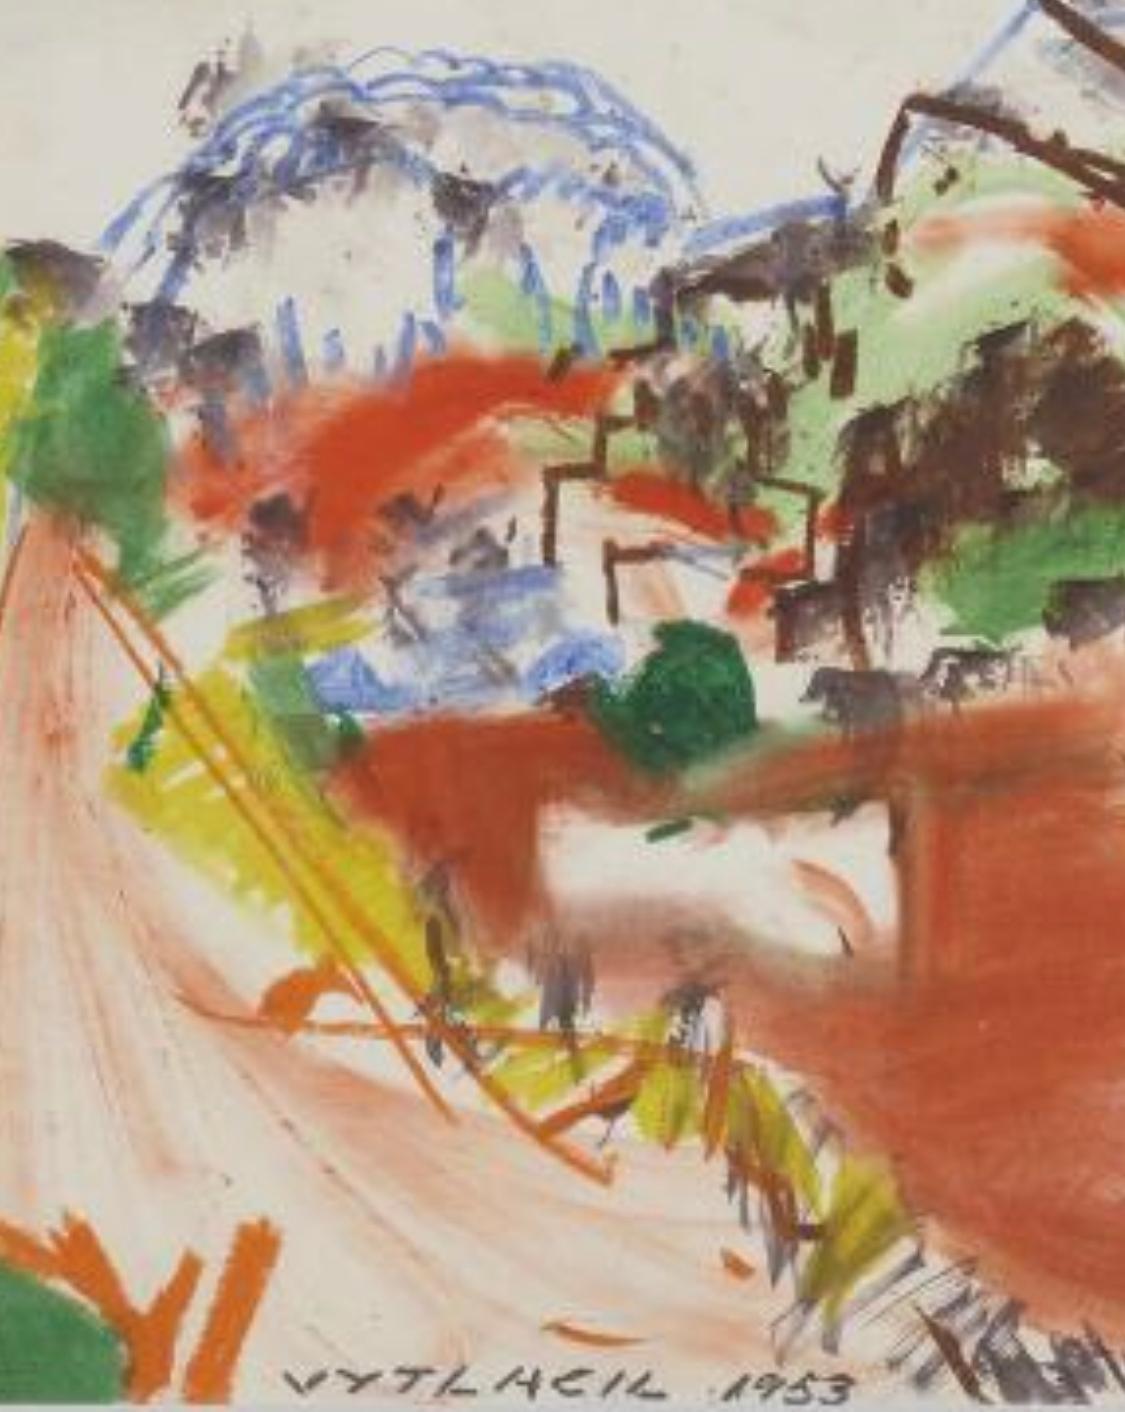 Oil pastel and watercolor on paper. Signed and dated to lower right edge 'Vaclav Vytlacil 1953'. Signed and dated to lower left edge 'Vytlacil 1953'. It is also titled on reverse. Painting measures: 20.25